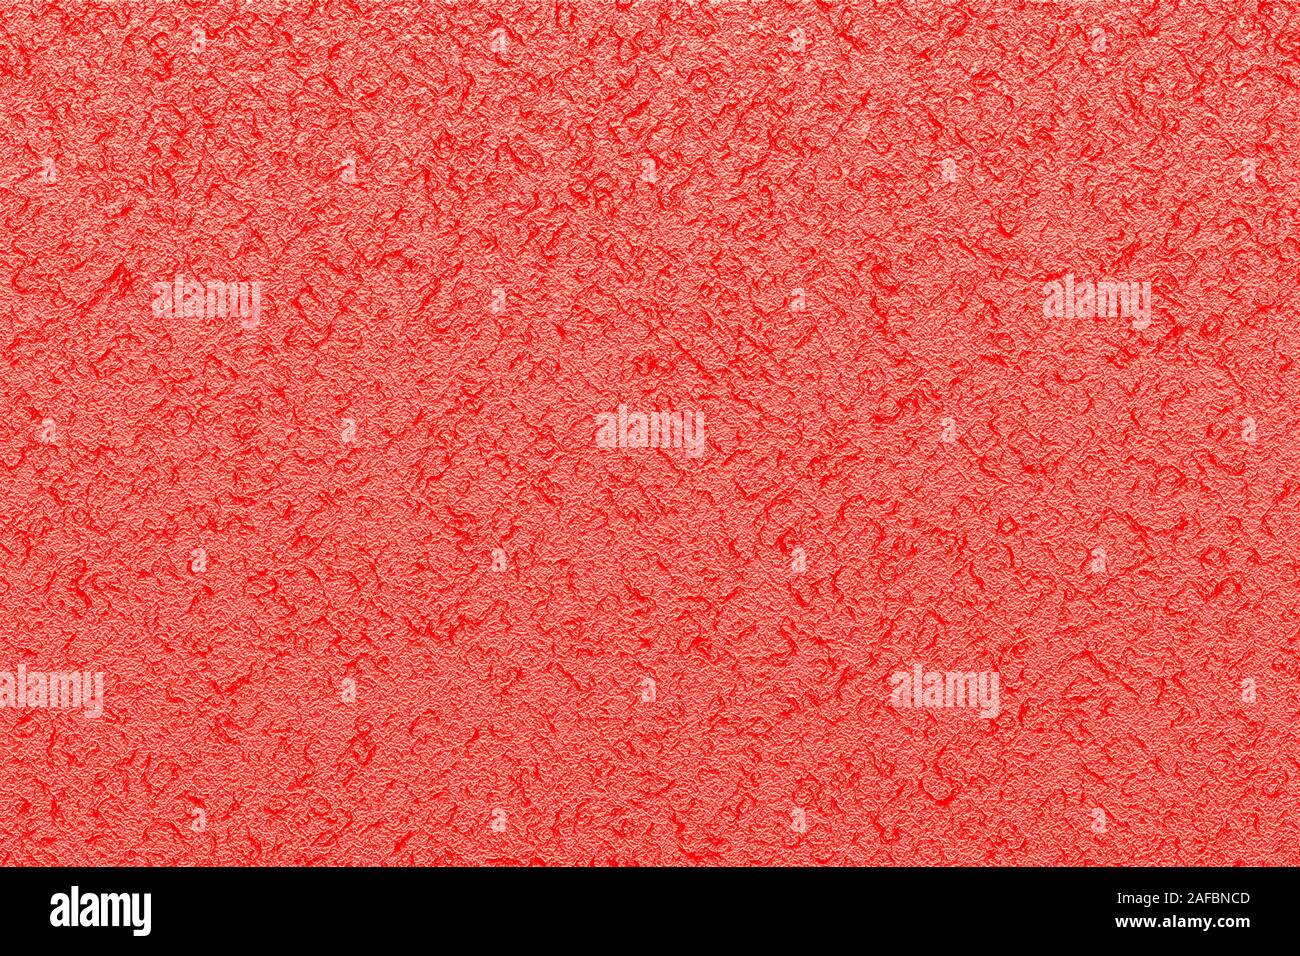 Abstract red swirls background. Pattern for decor, fashion design Stock Photo